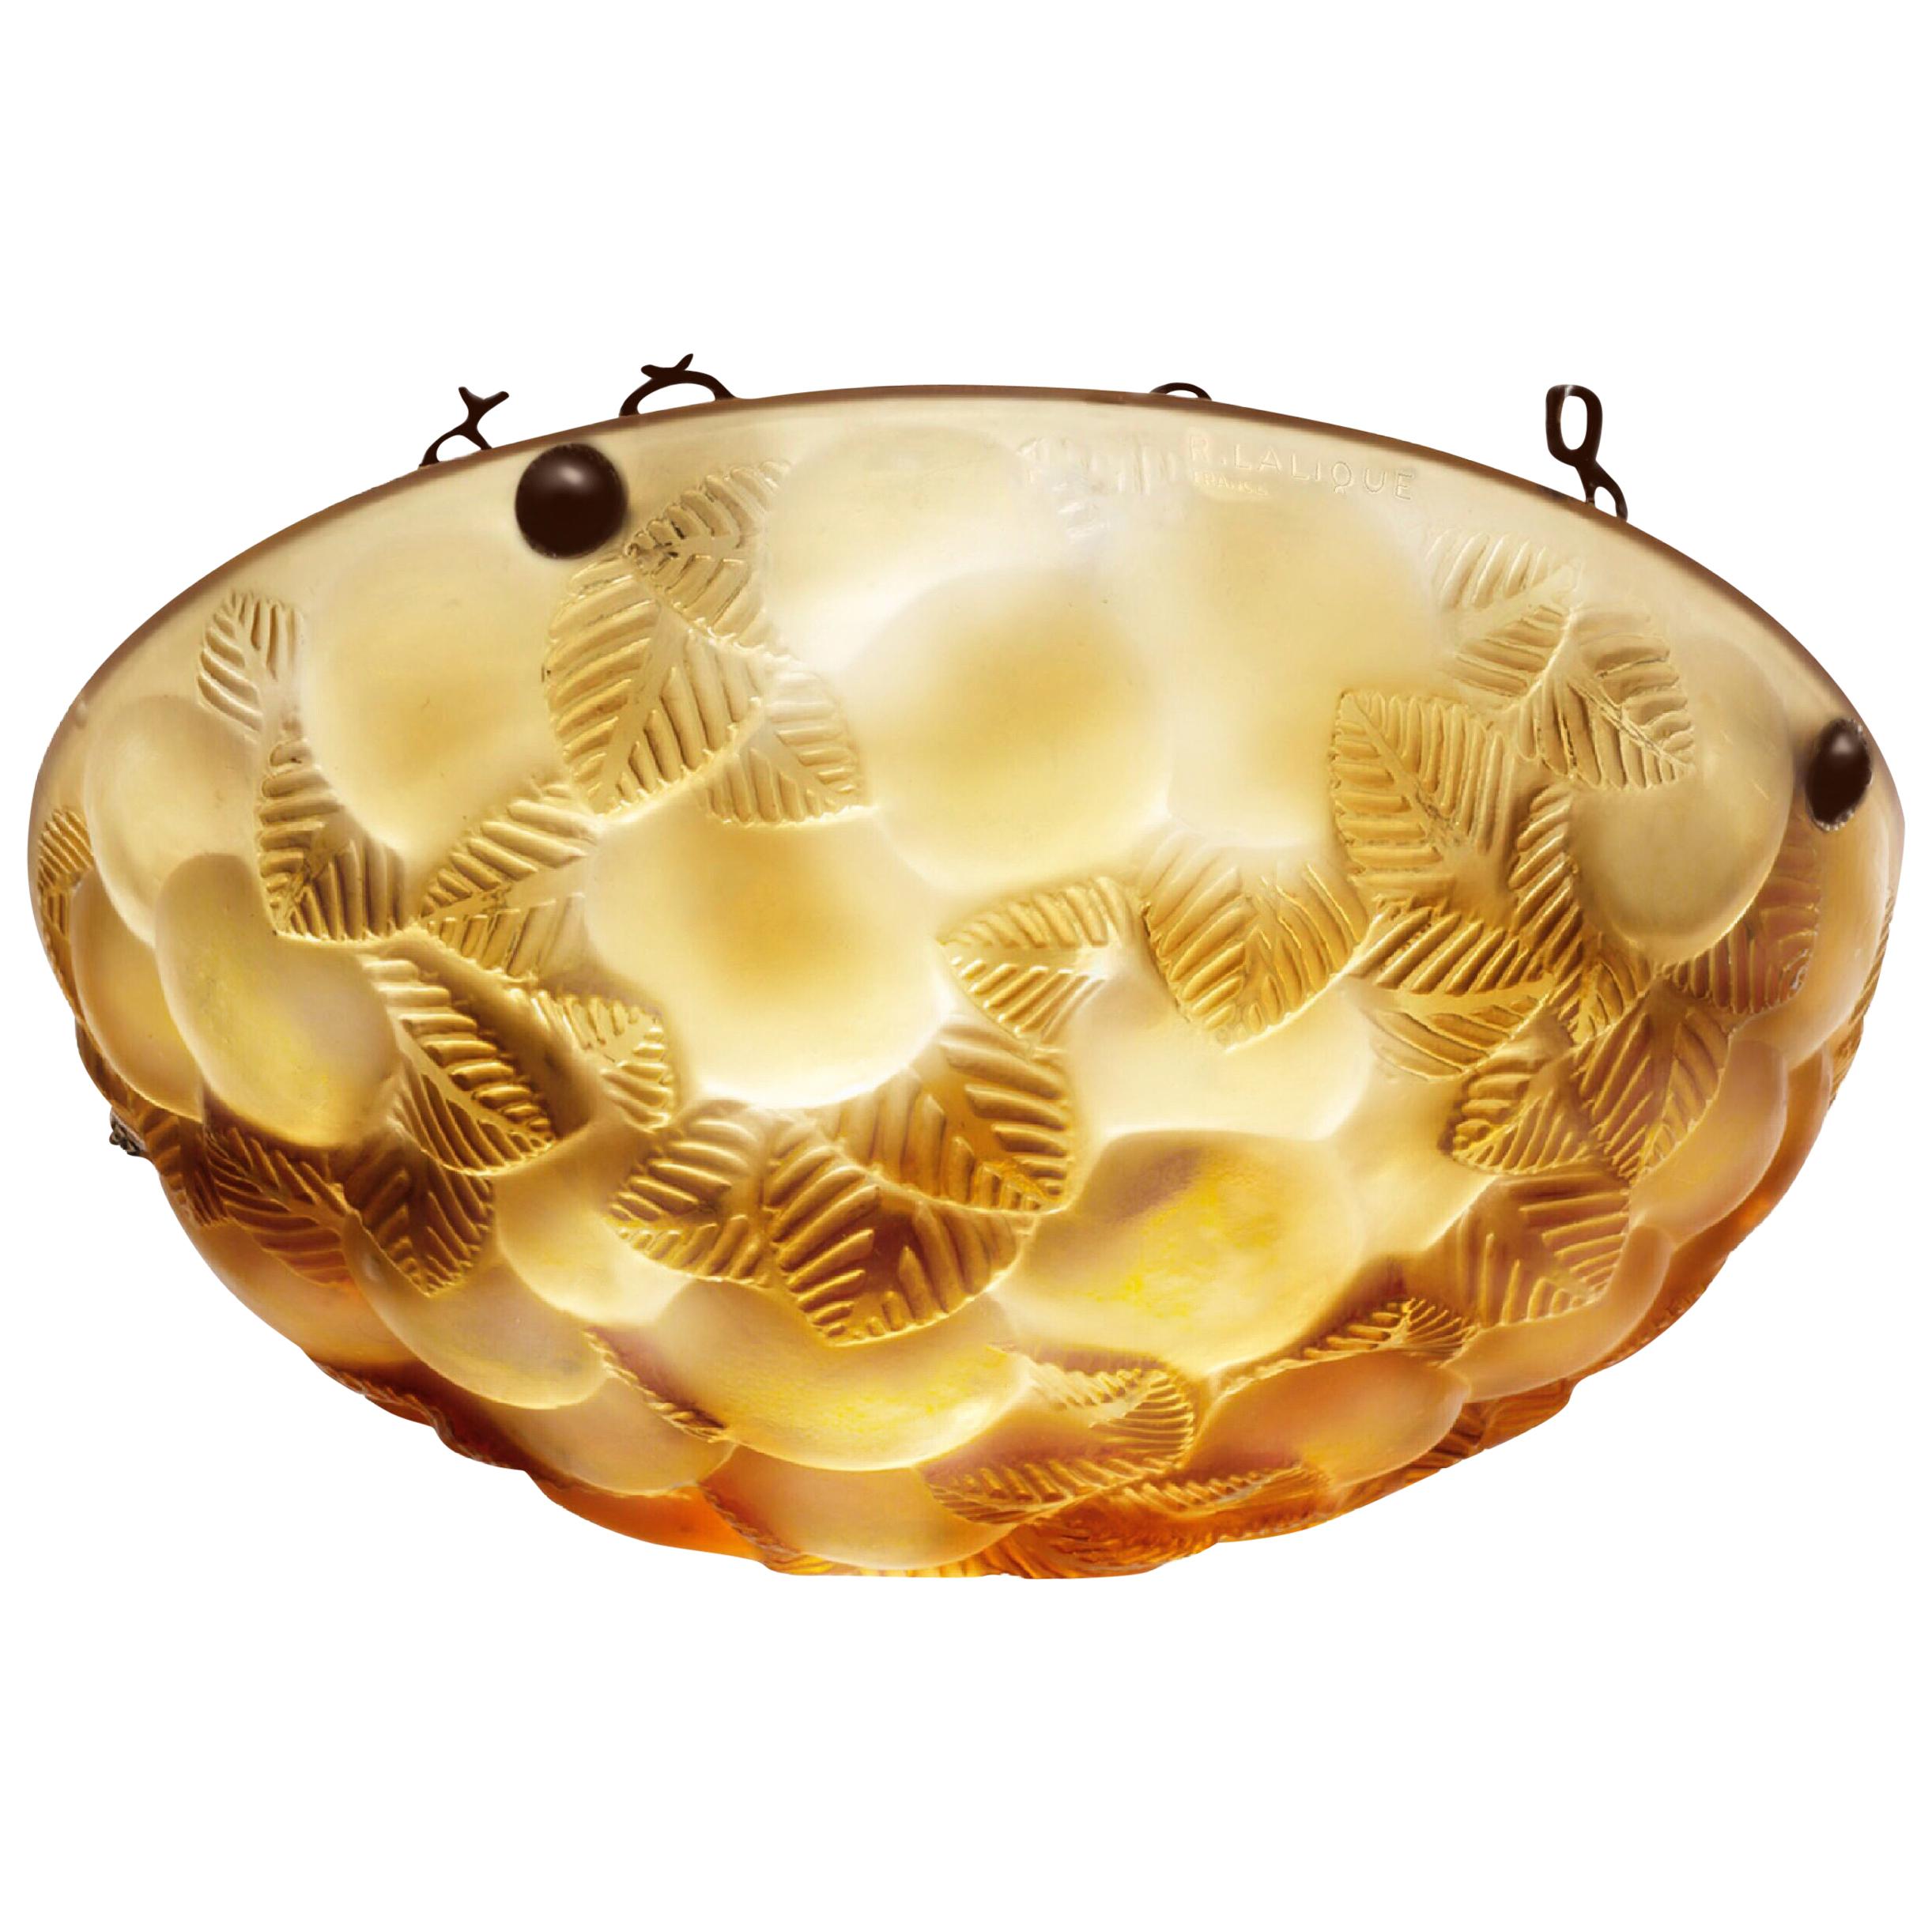 Rene Lalique Lausanne Plafonnier Chandelier No.2479, Amber Crystal, Signed, 1929